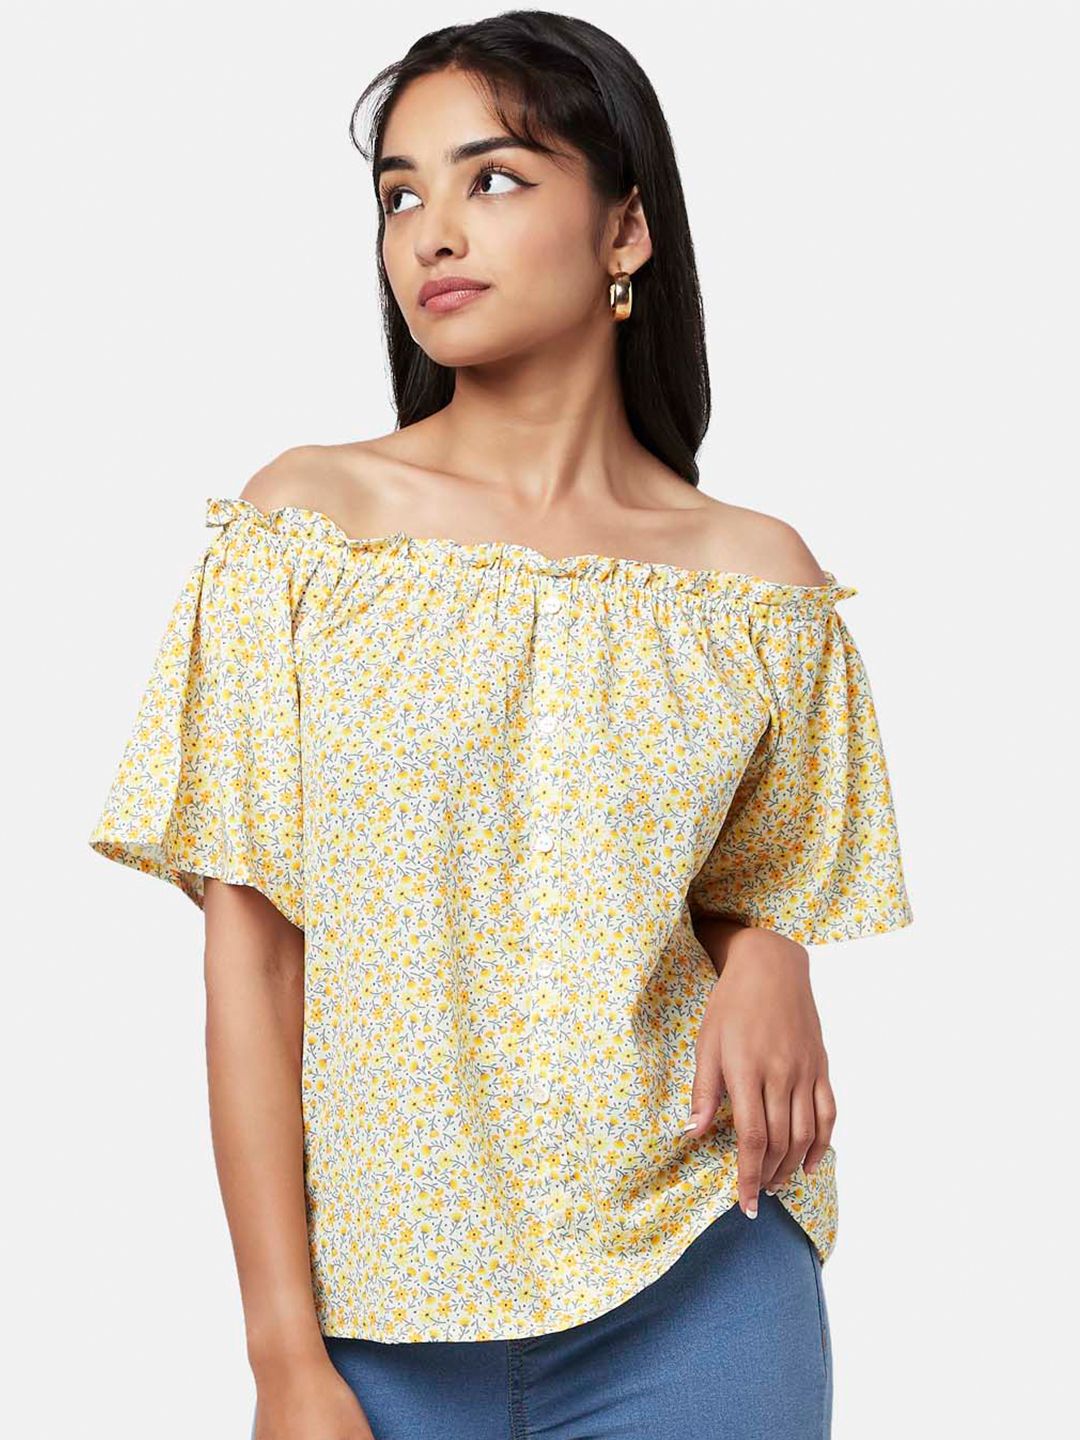 YU by Pantaloons Yellow Floral Print Off-Shoulder Bardot Top Price in India